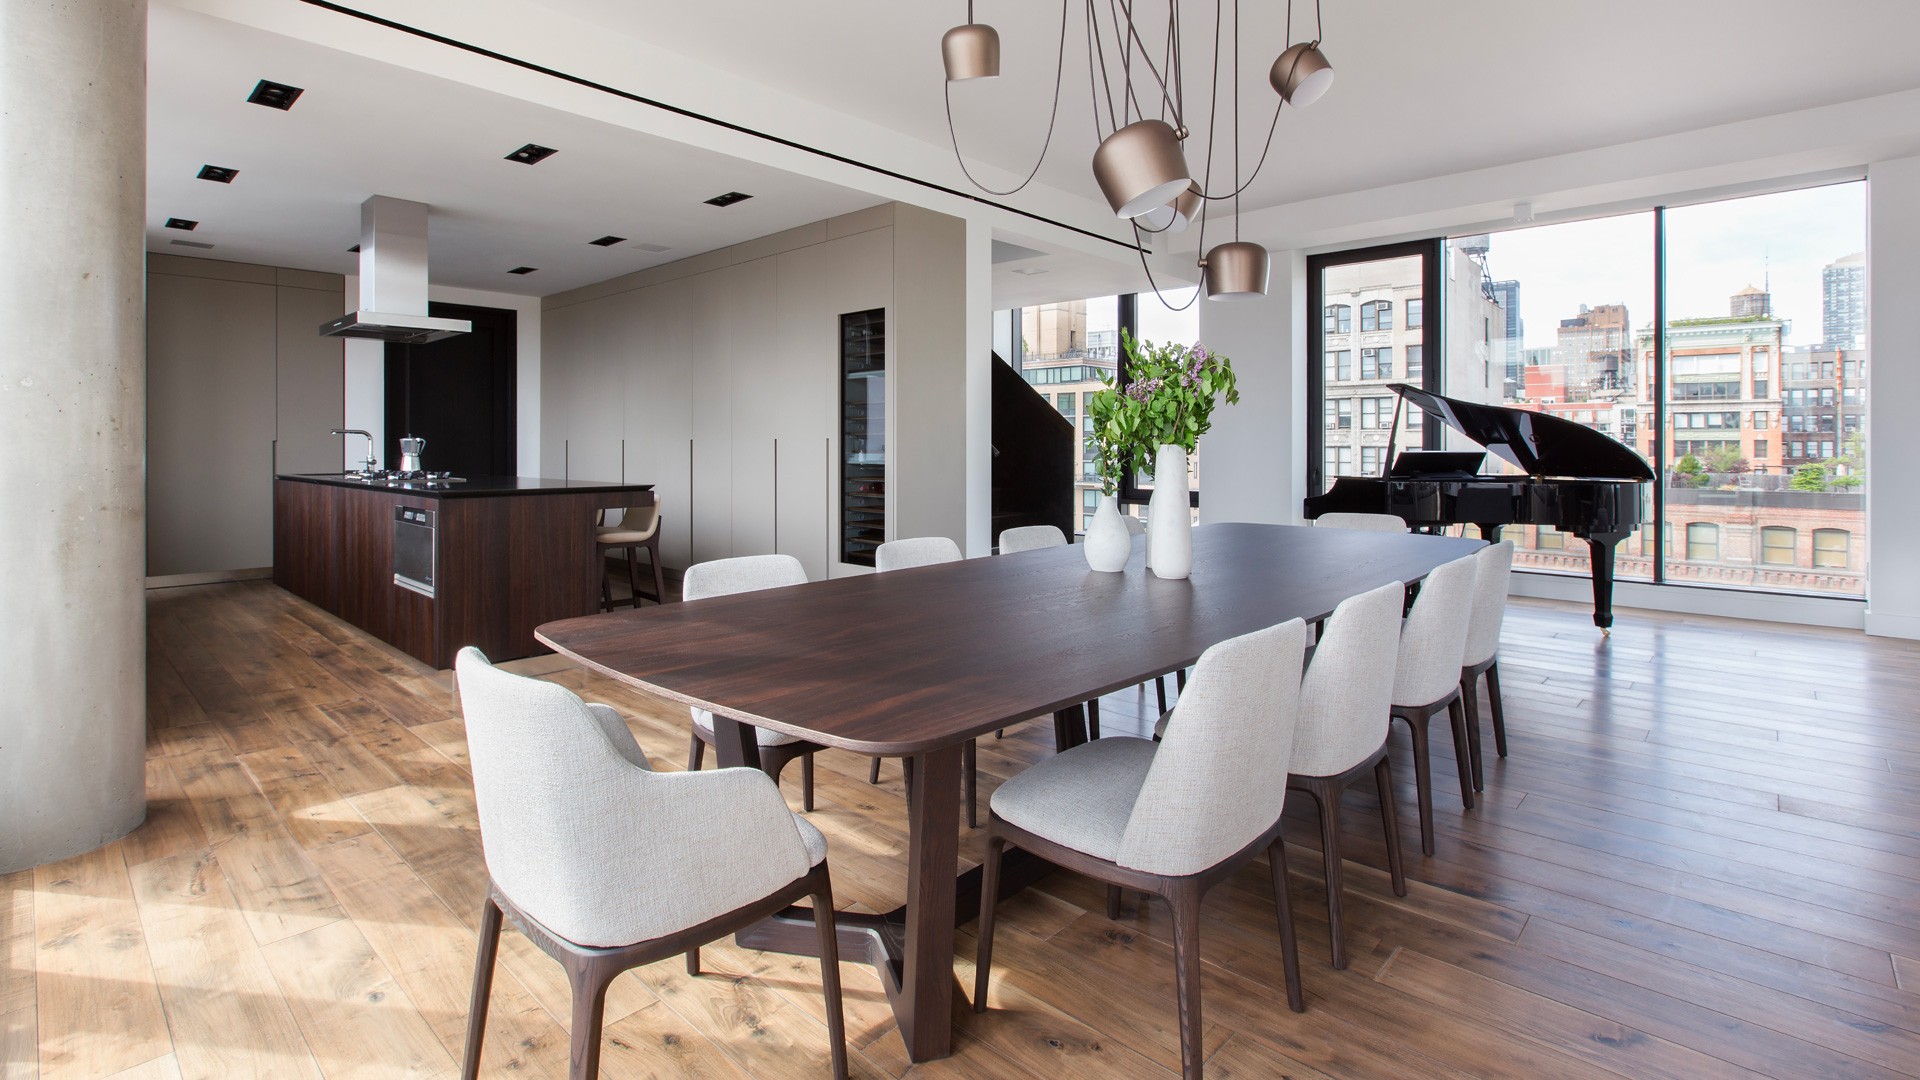 Poliform_contract_residential_THE_FLYNN_06_1920x1080px_gallery